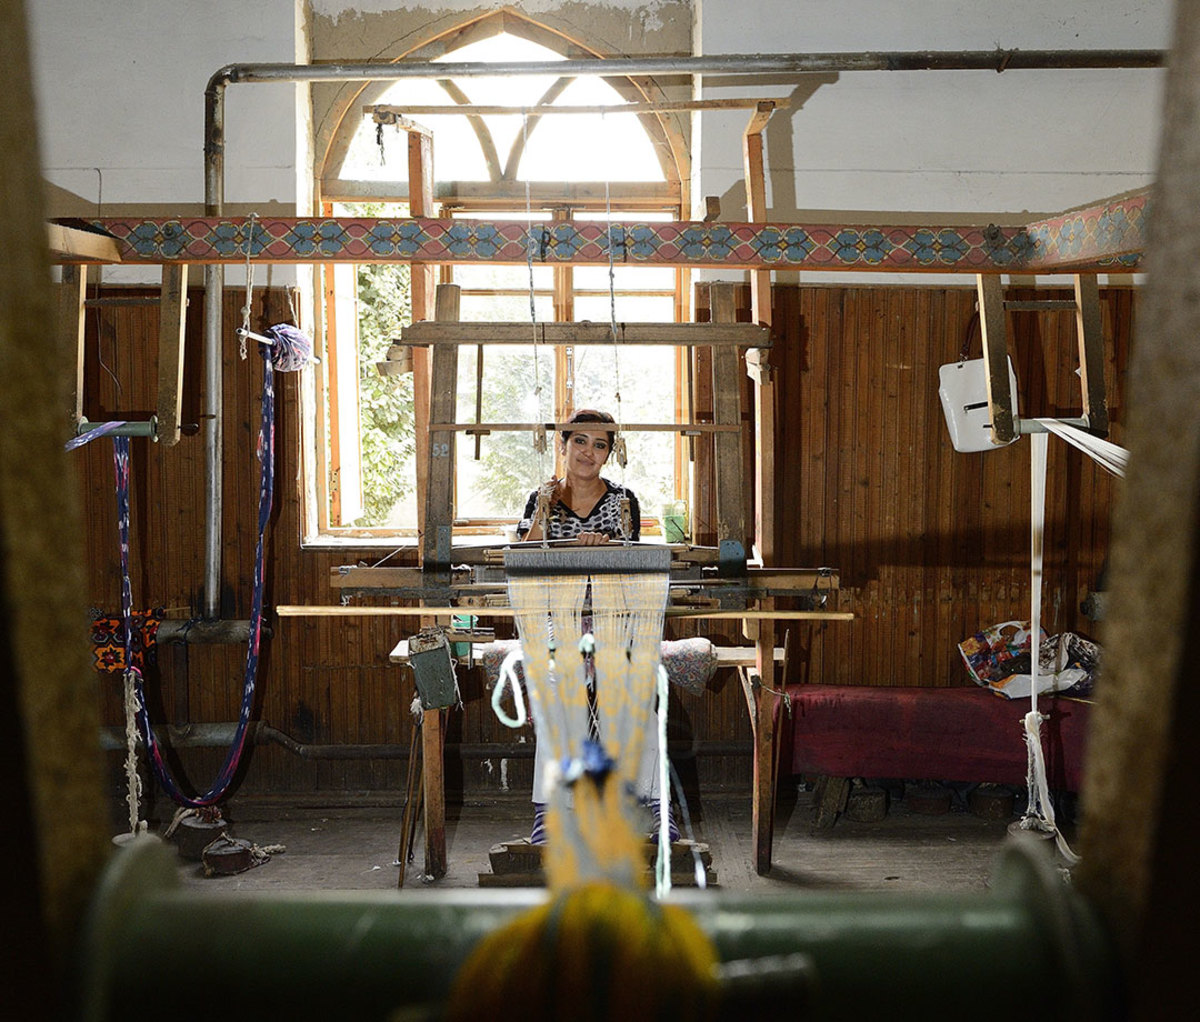 Loom of the Silk Factory in the City of Margillan